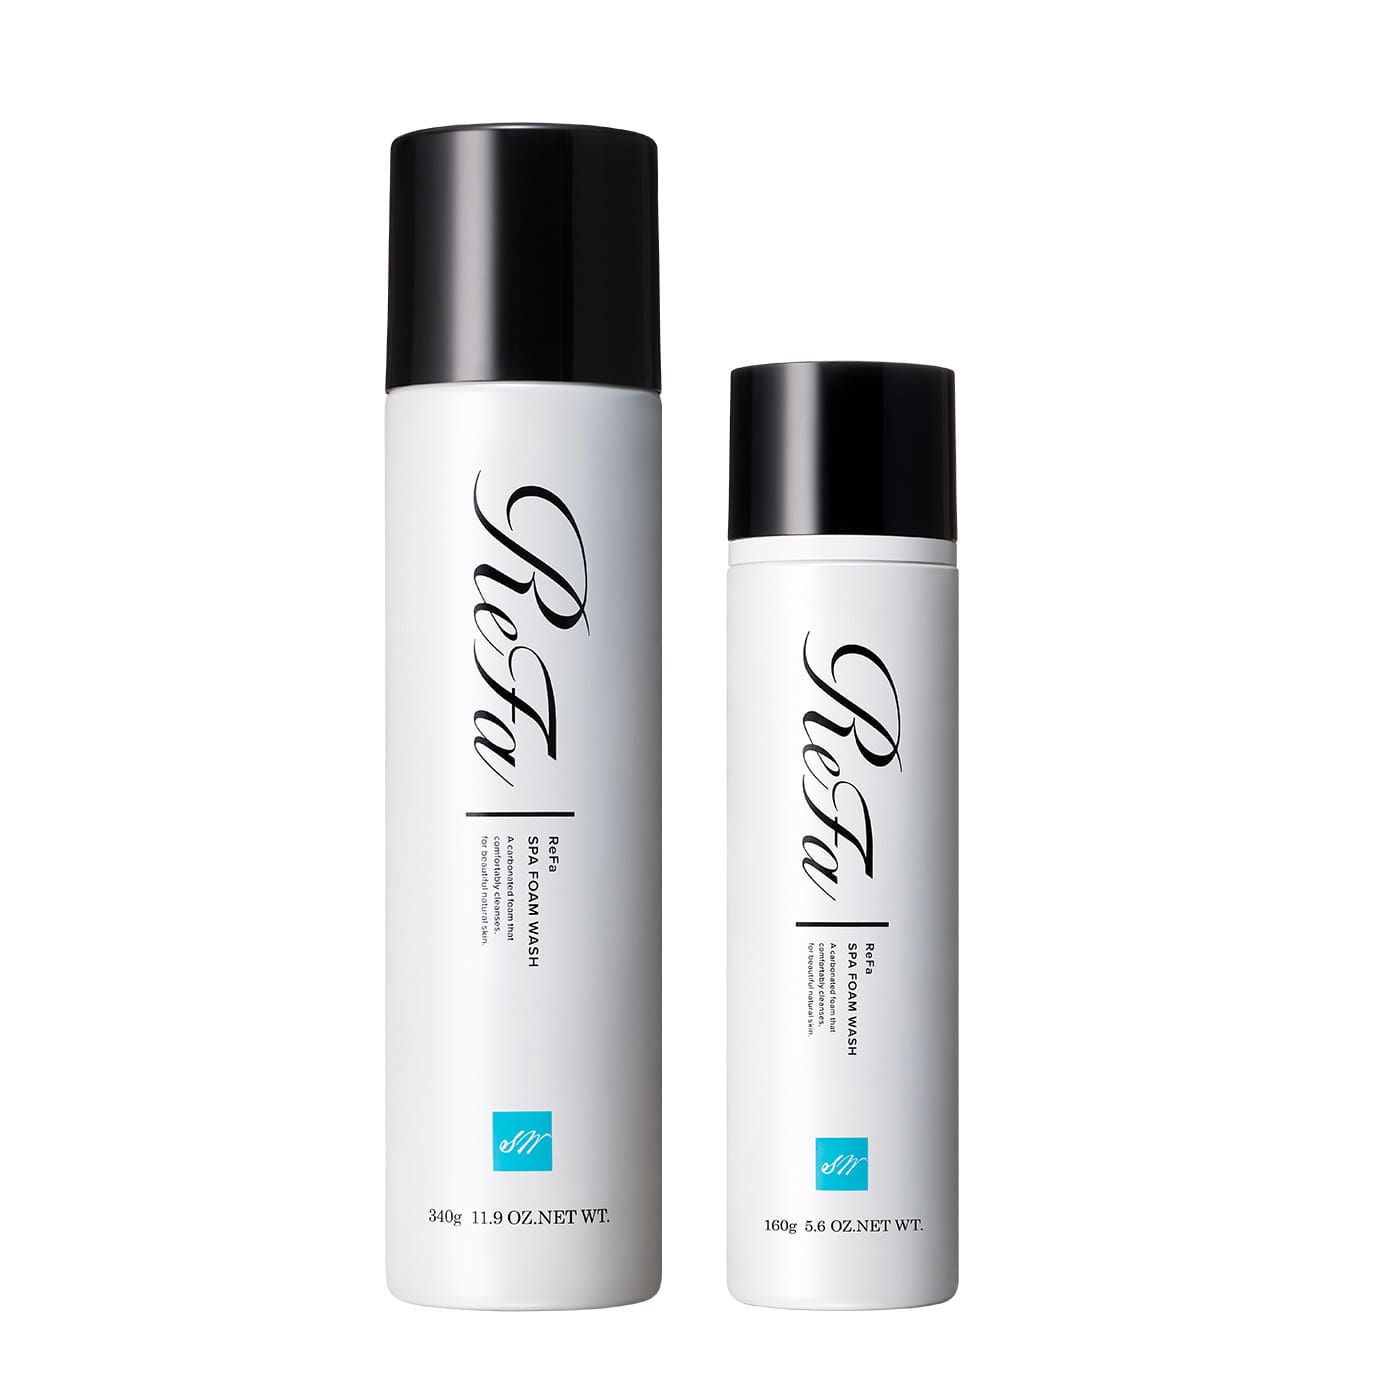 Refreshing and moisturizing. A dense foam cleanser with carbonated* fine bubbles. Introducing ReFa SPA FOAM WASH.